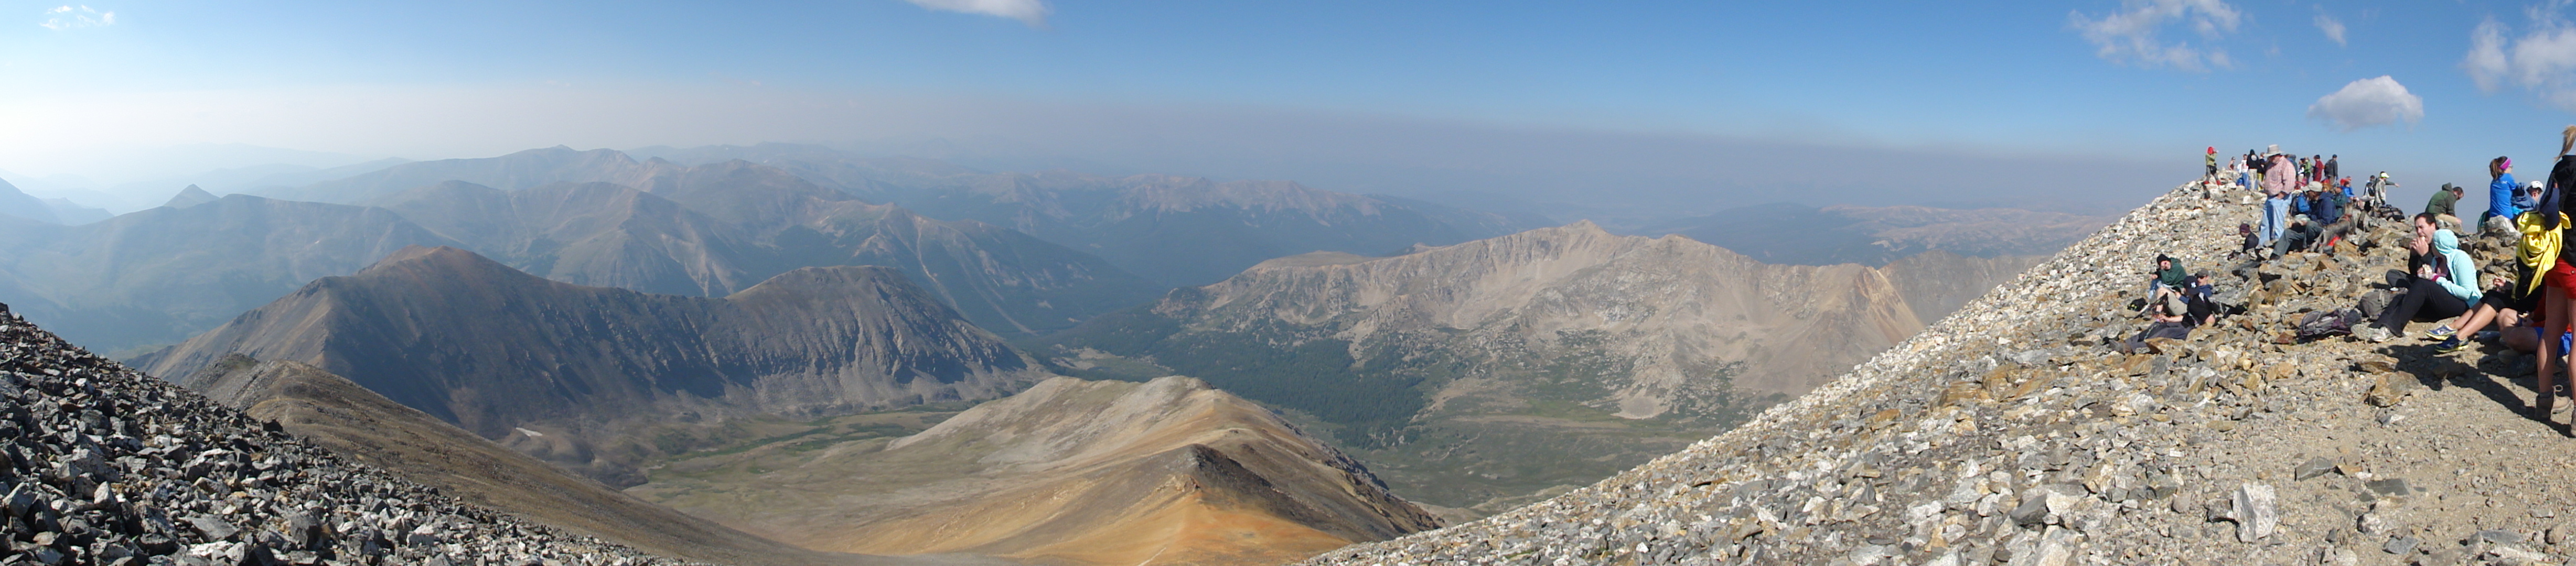 Panorama_from_on_top_of_Mount_Grays